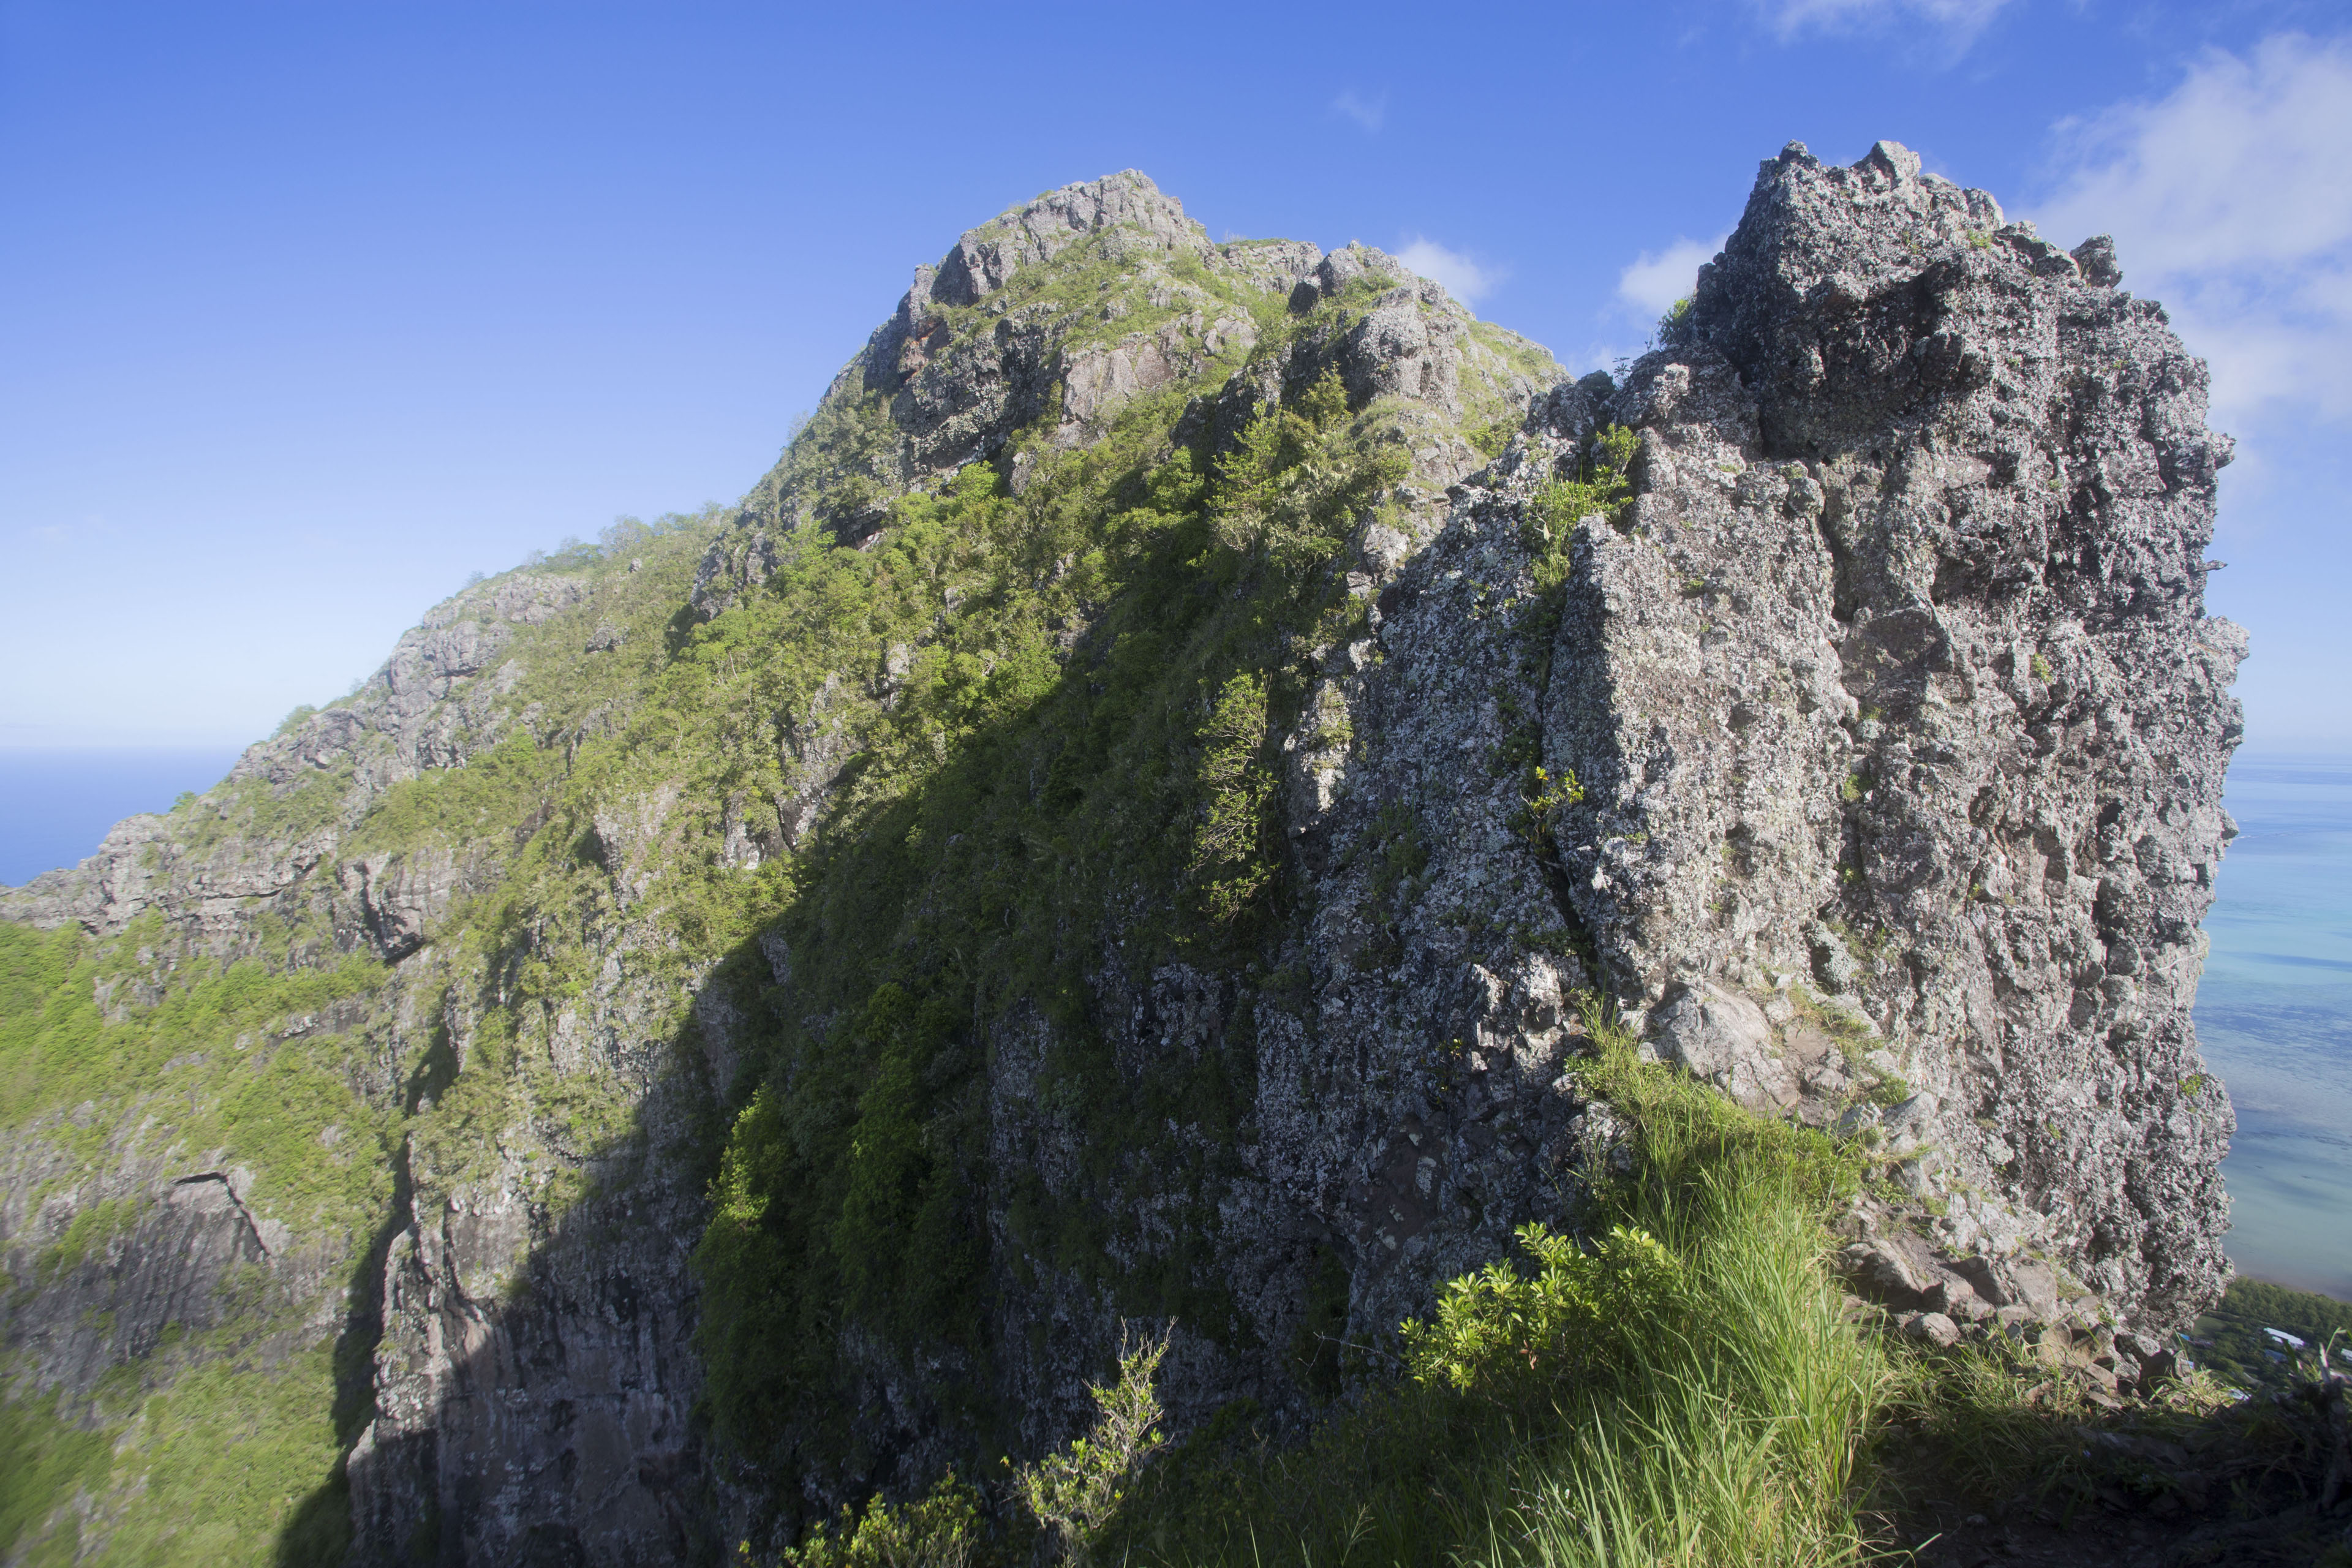 View towards the summit of Le Morne Brabant | Le Morne Brabant | Maurizio